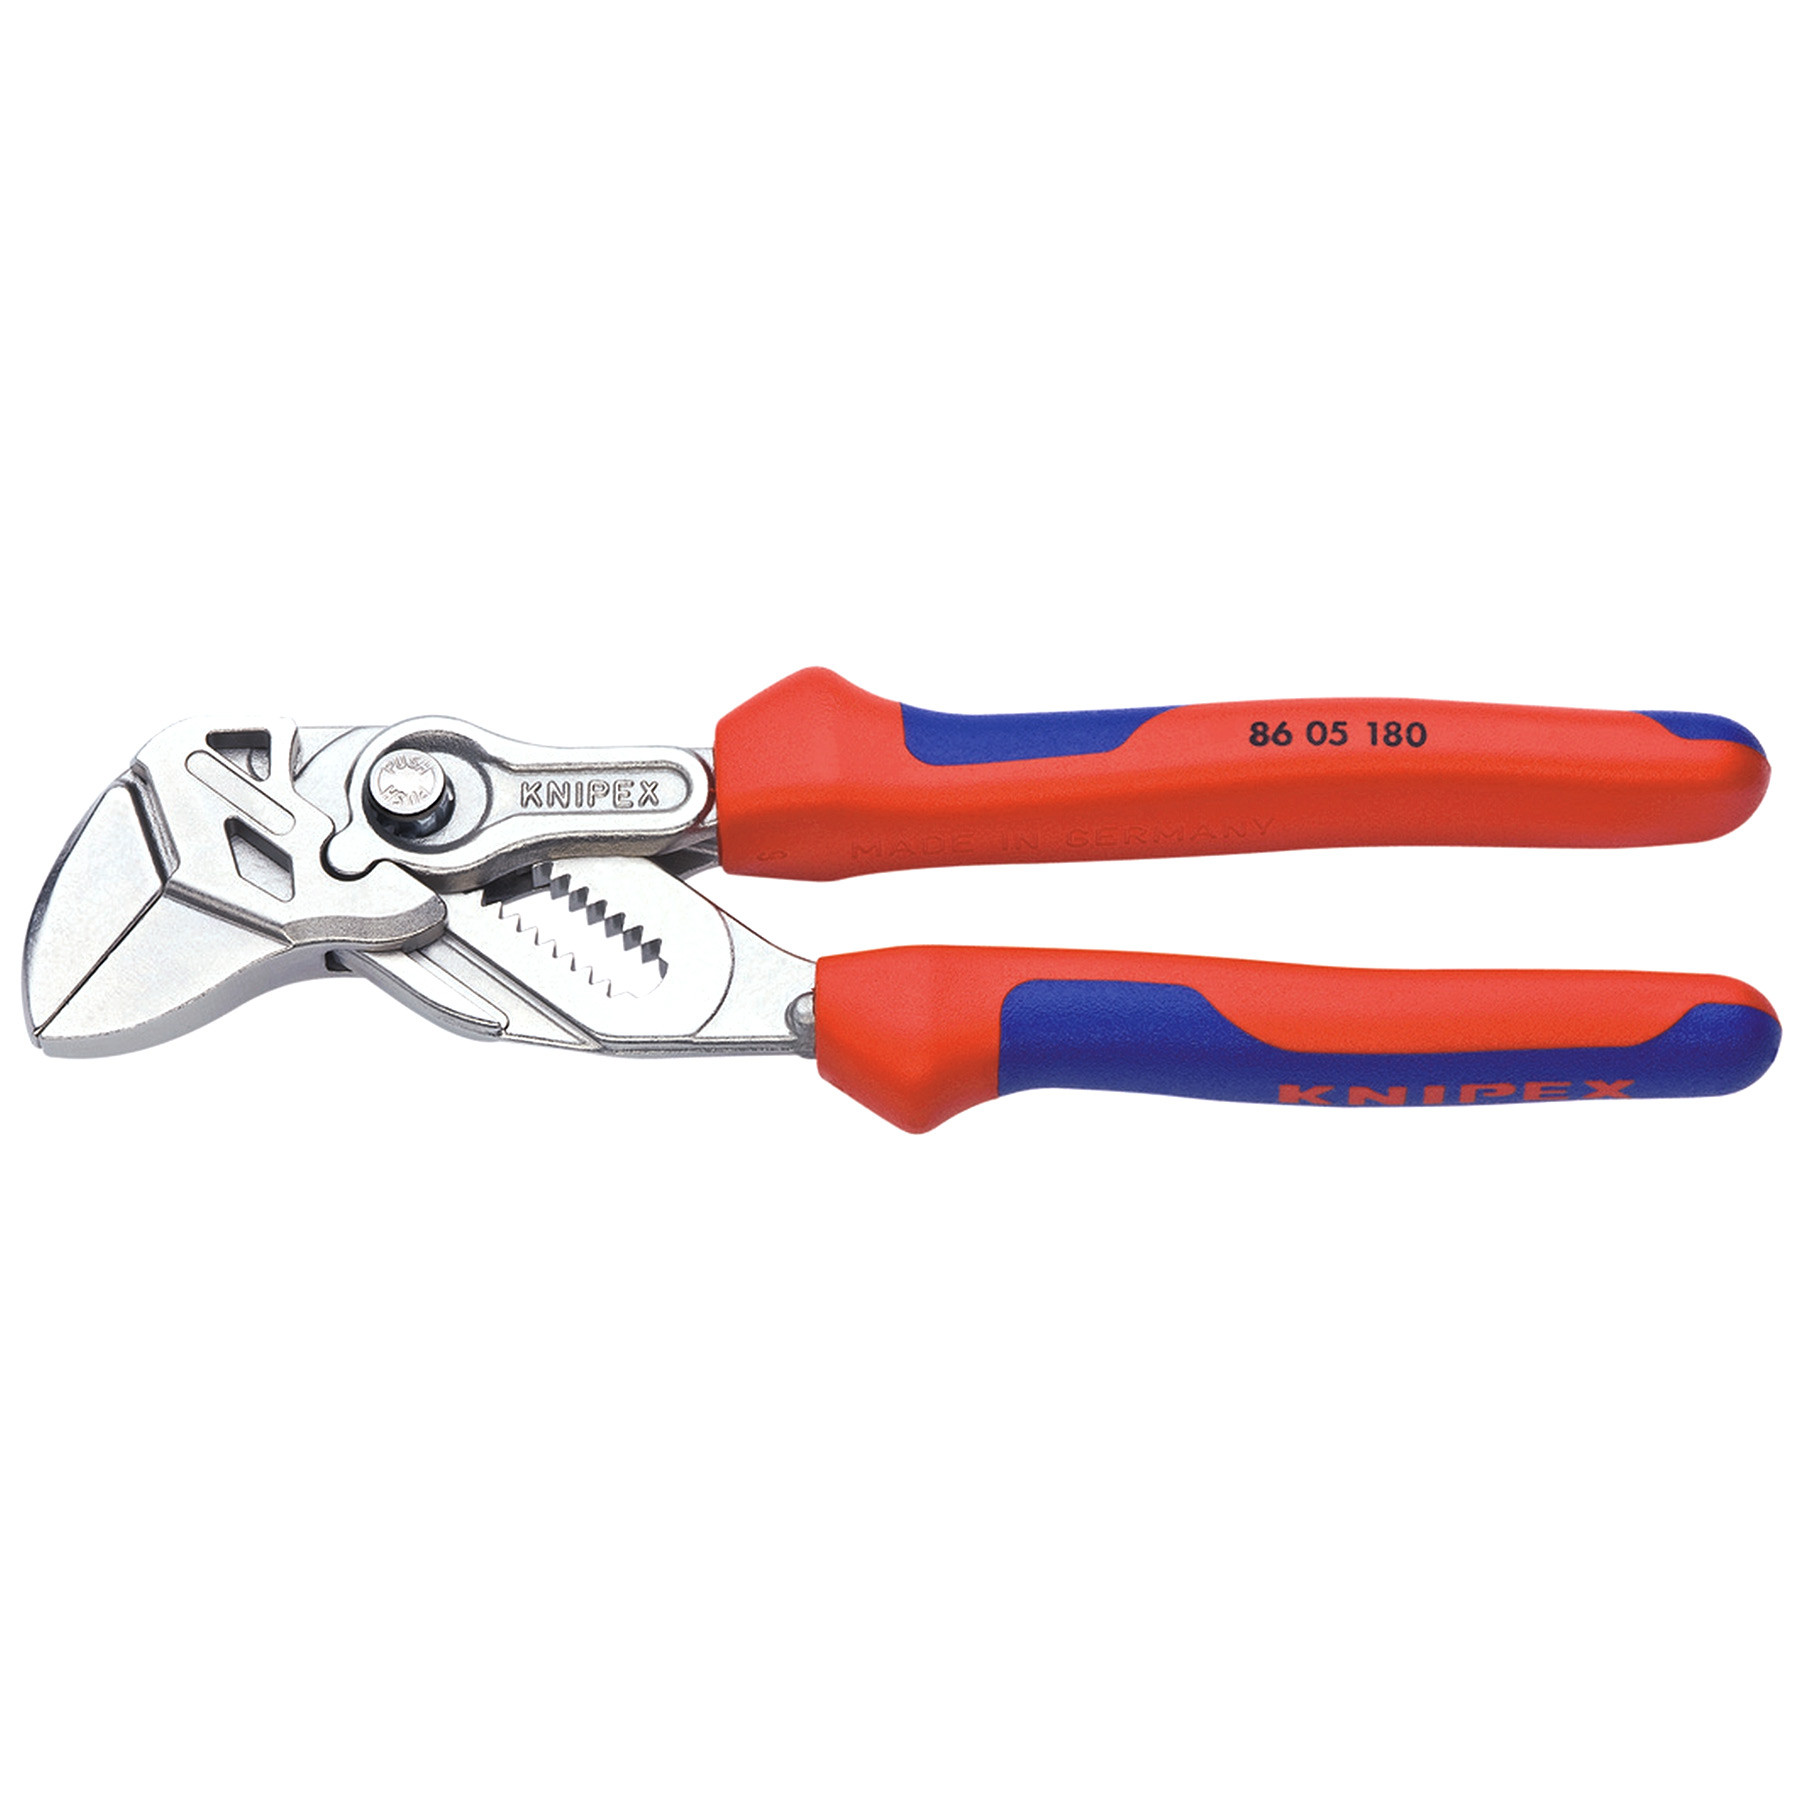 KNIPEX Pliers Wrench, Multi-Component, Chrome, 7 (86 05 180) - DRPD